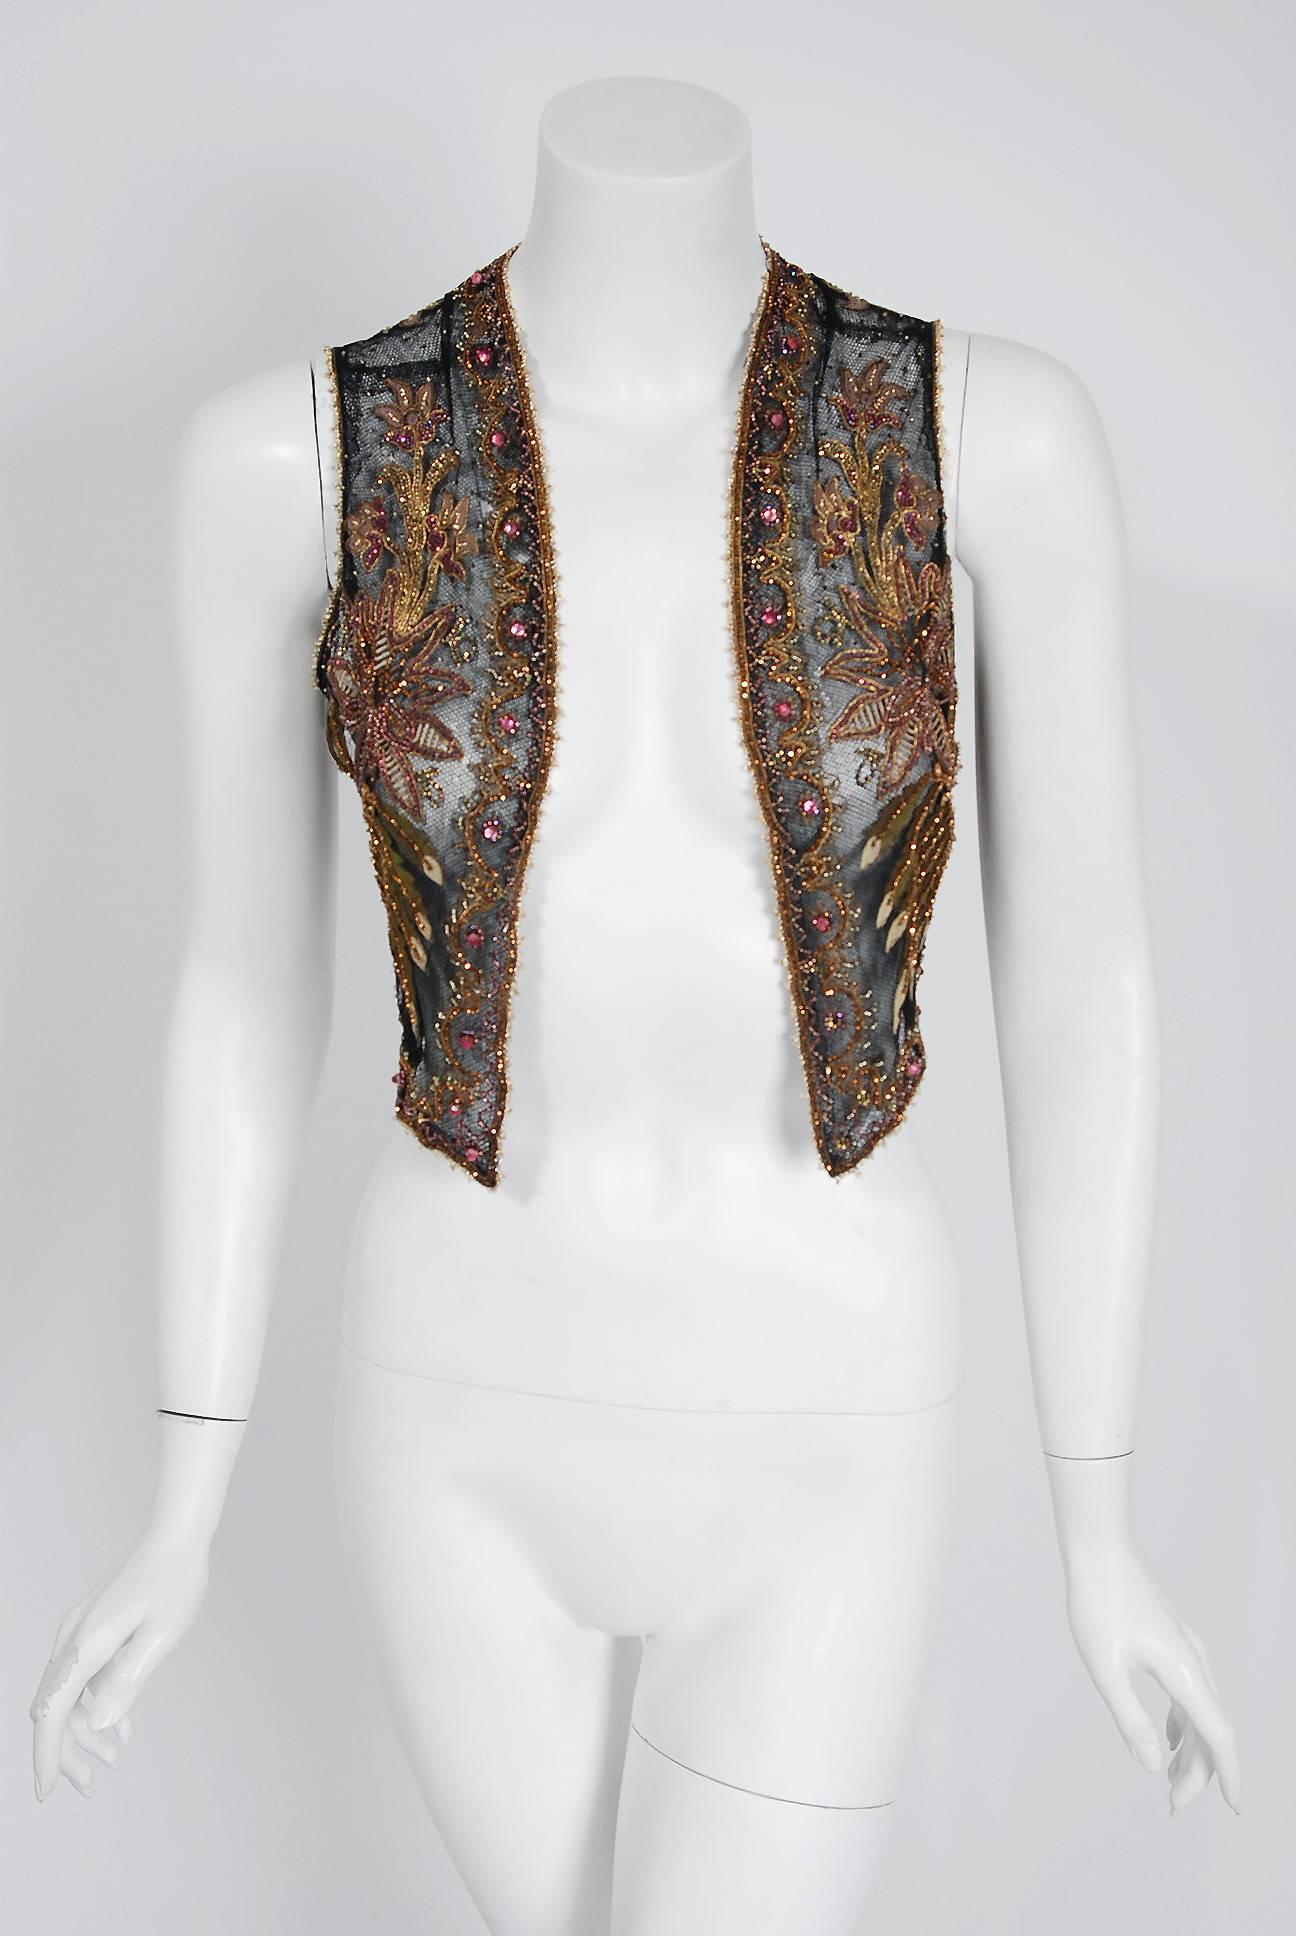 This sensational 1910's French Edwardian bolero vest is lavishly embellished with glossy glass beads and sparkling jewels throughout. The highly stylized floral embroidery perfectly captures the Art Nouveau aesthetic. Double layered 